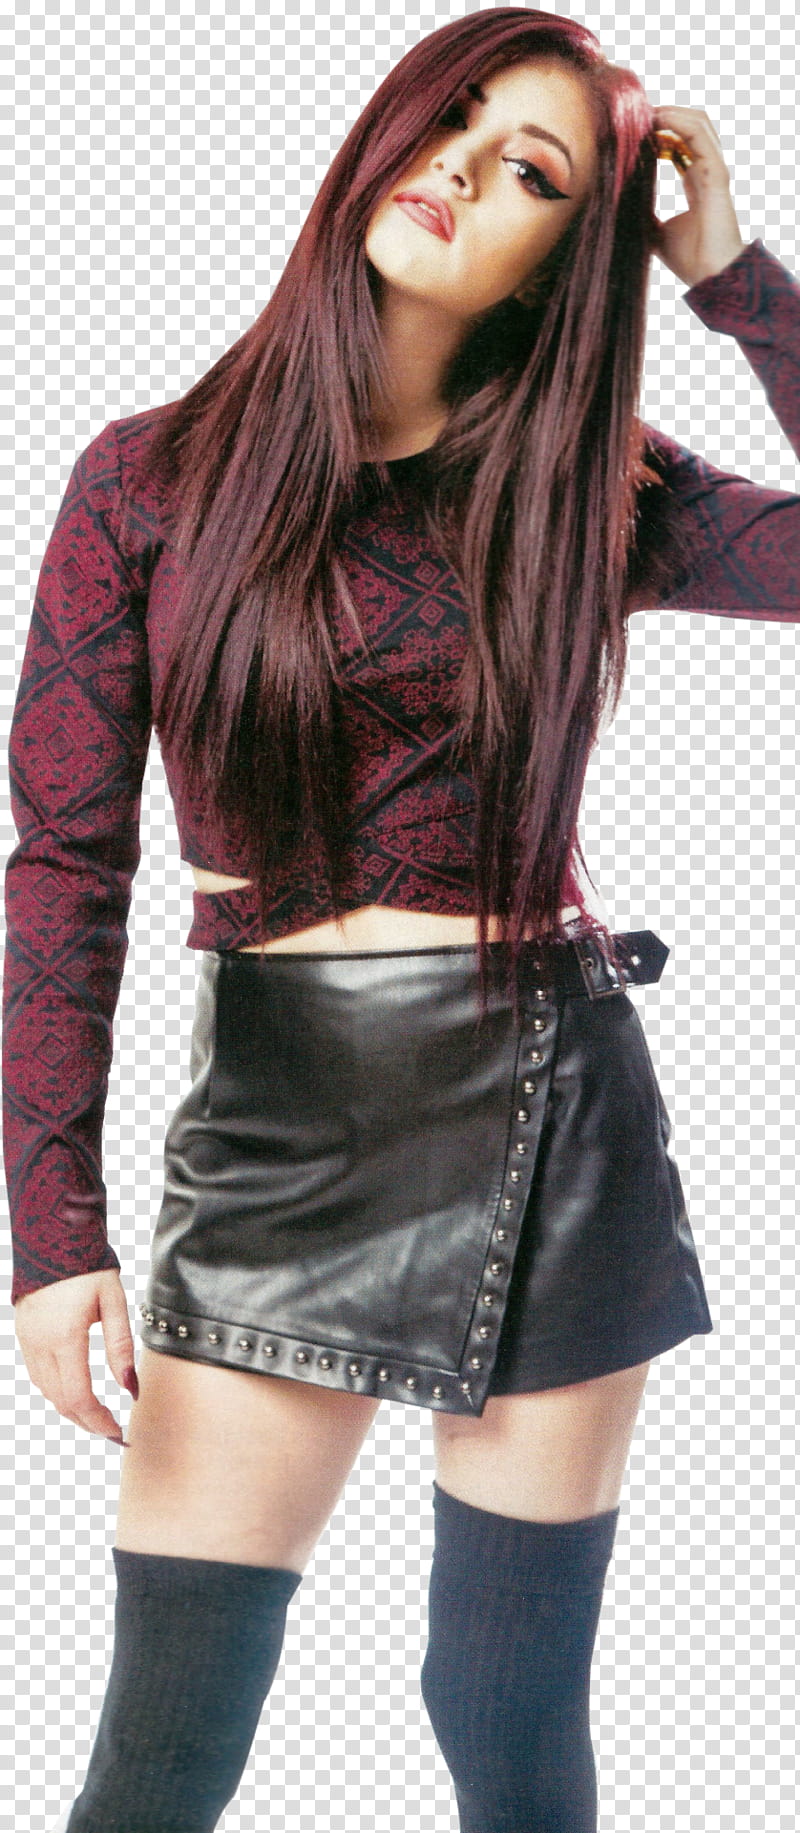 CHRISSY COSTANZA, woman in maroon and black long-sleeved top and black leather skirt transparent background PNG clipart